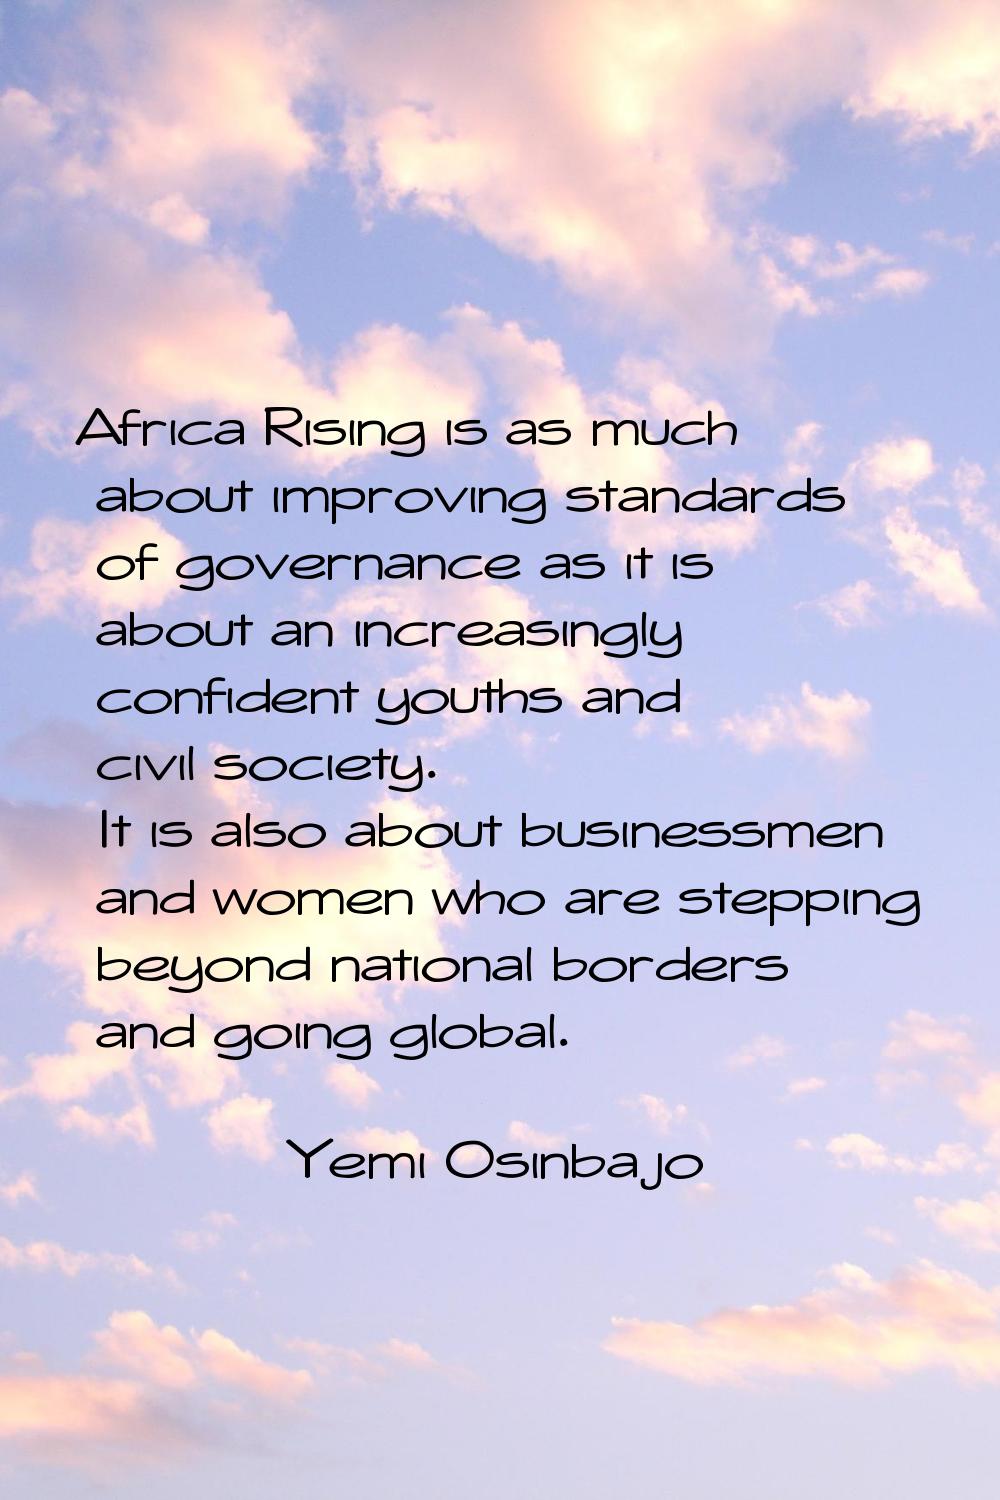 Africa Rising is as much about improving standards of governance as it is about an increasingly con